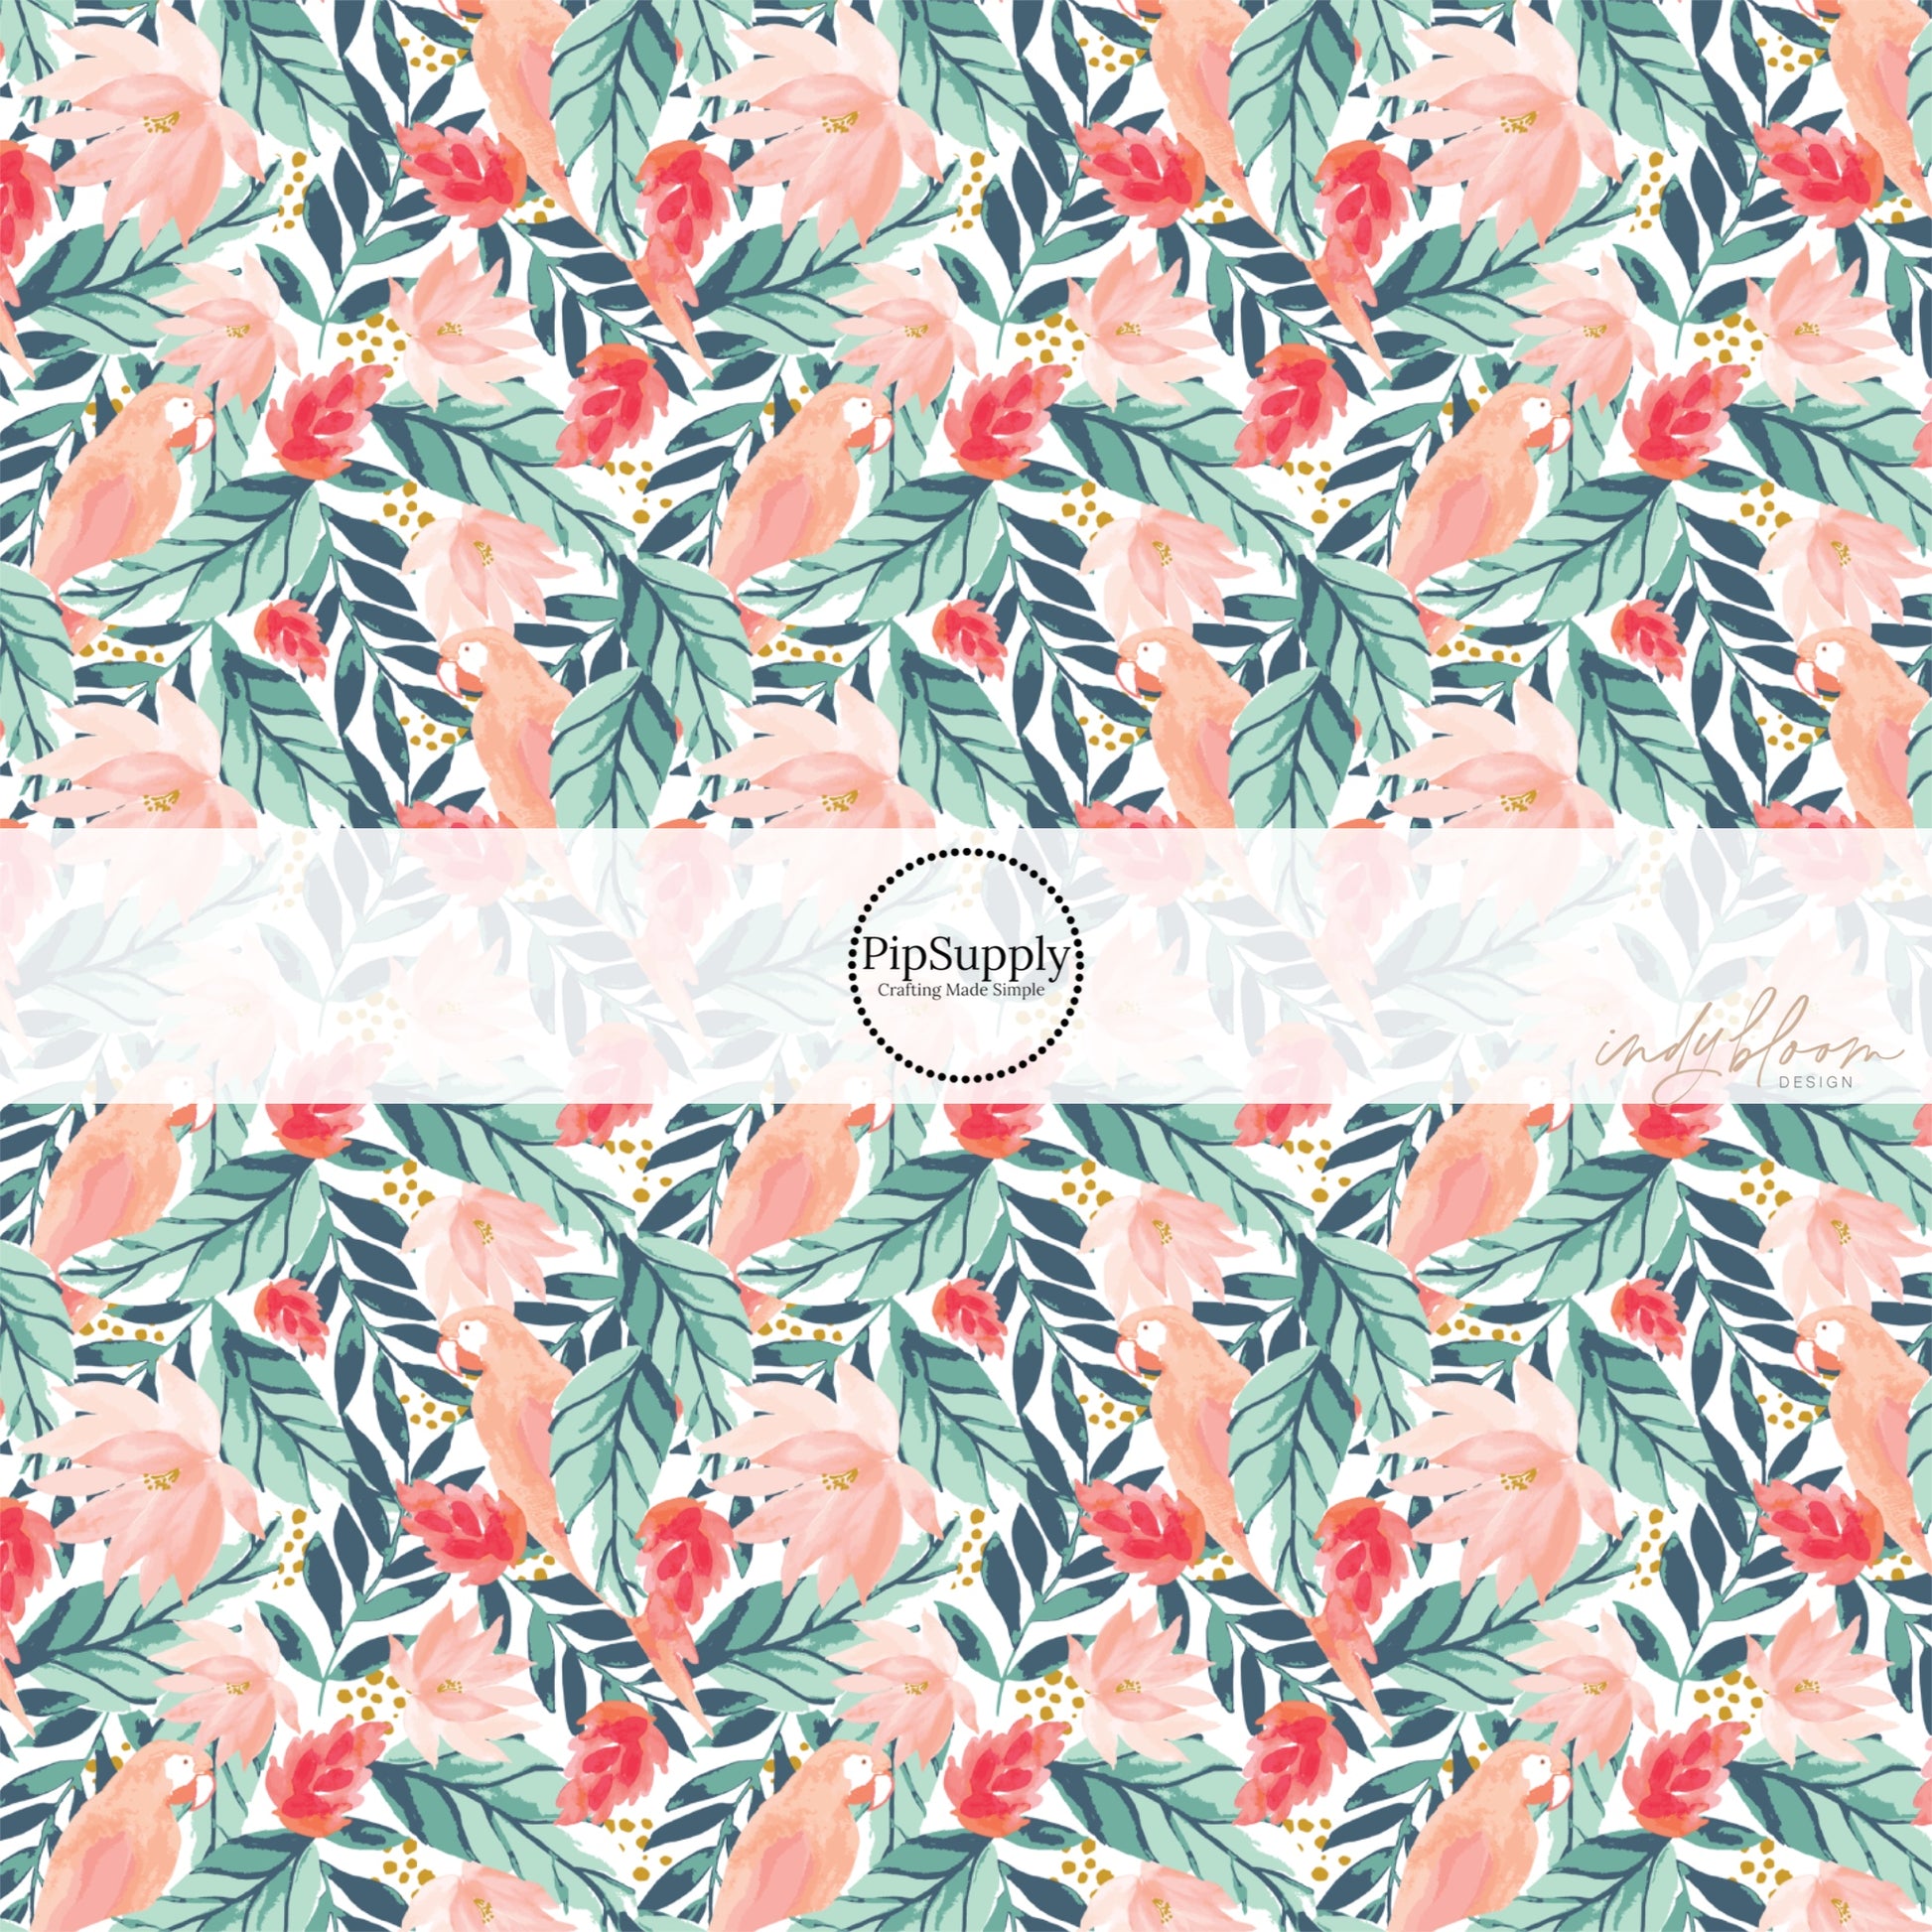 Tropical themed fabric by the yard with pink parrots and green palm leaves.